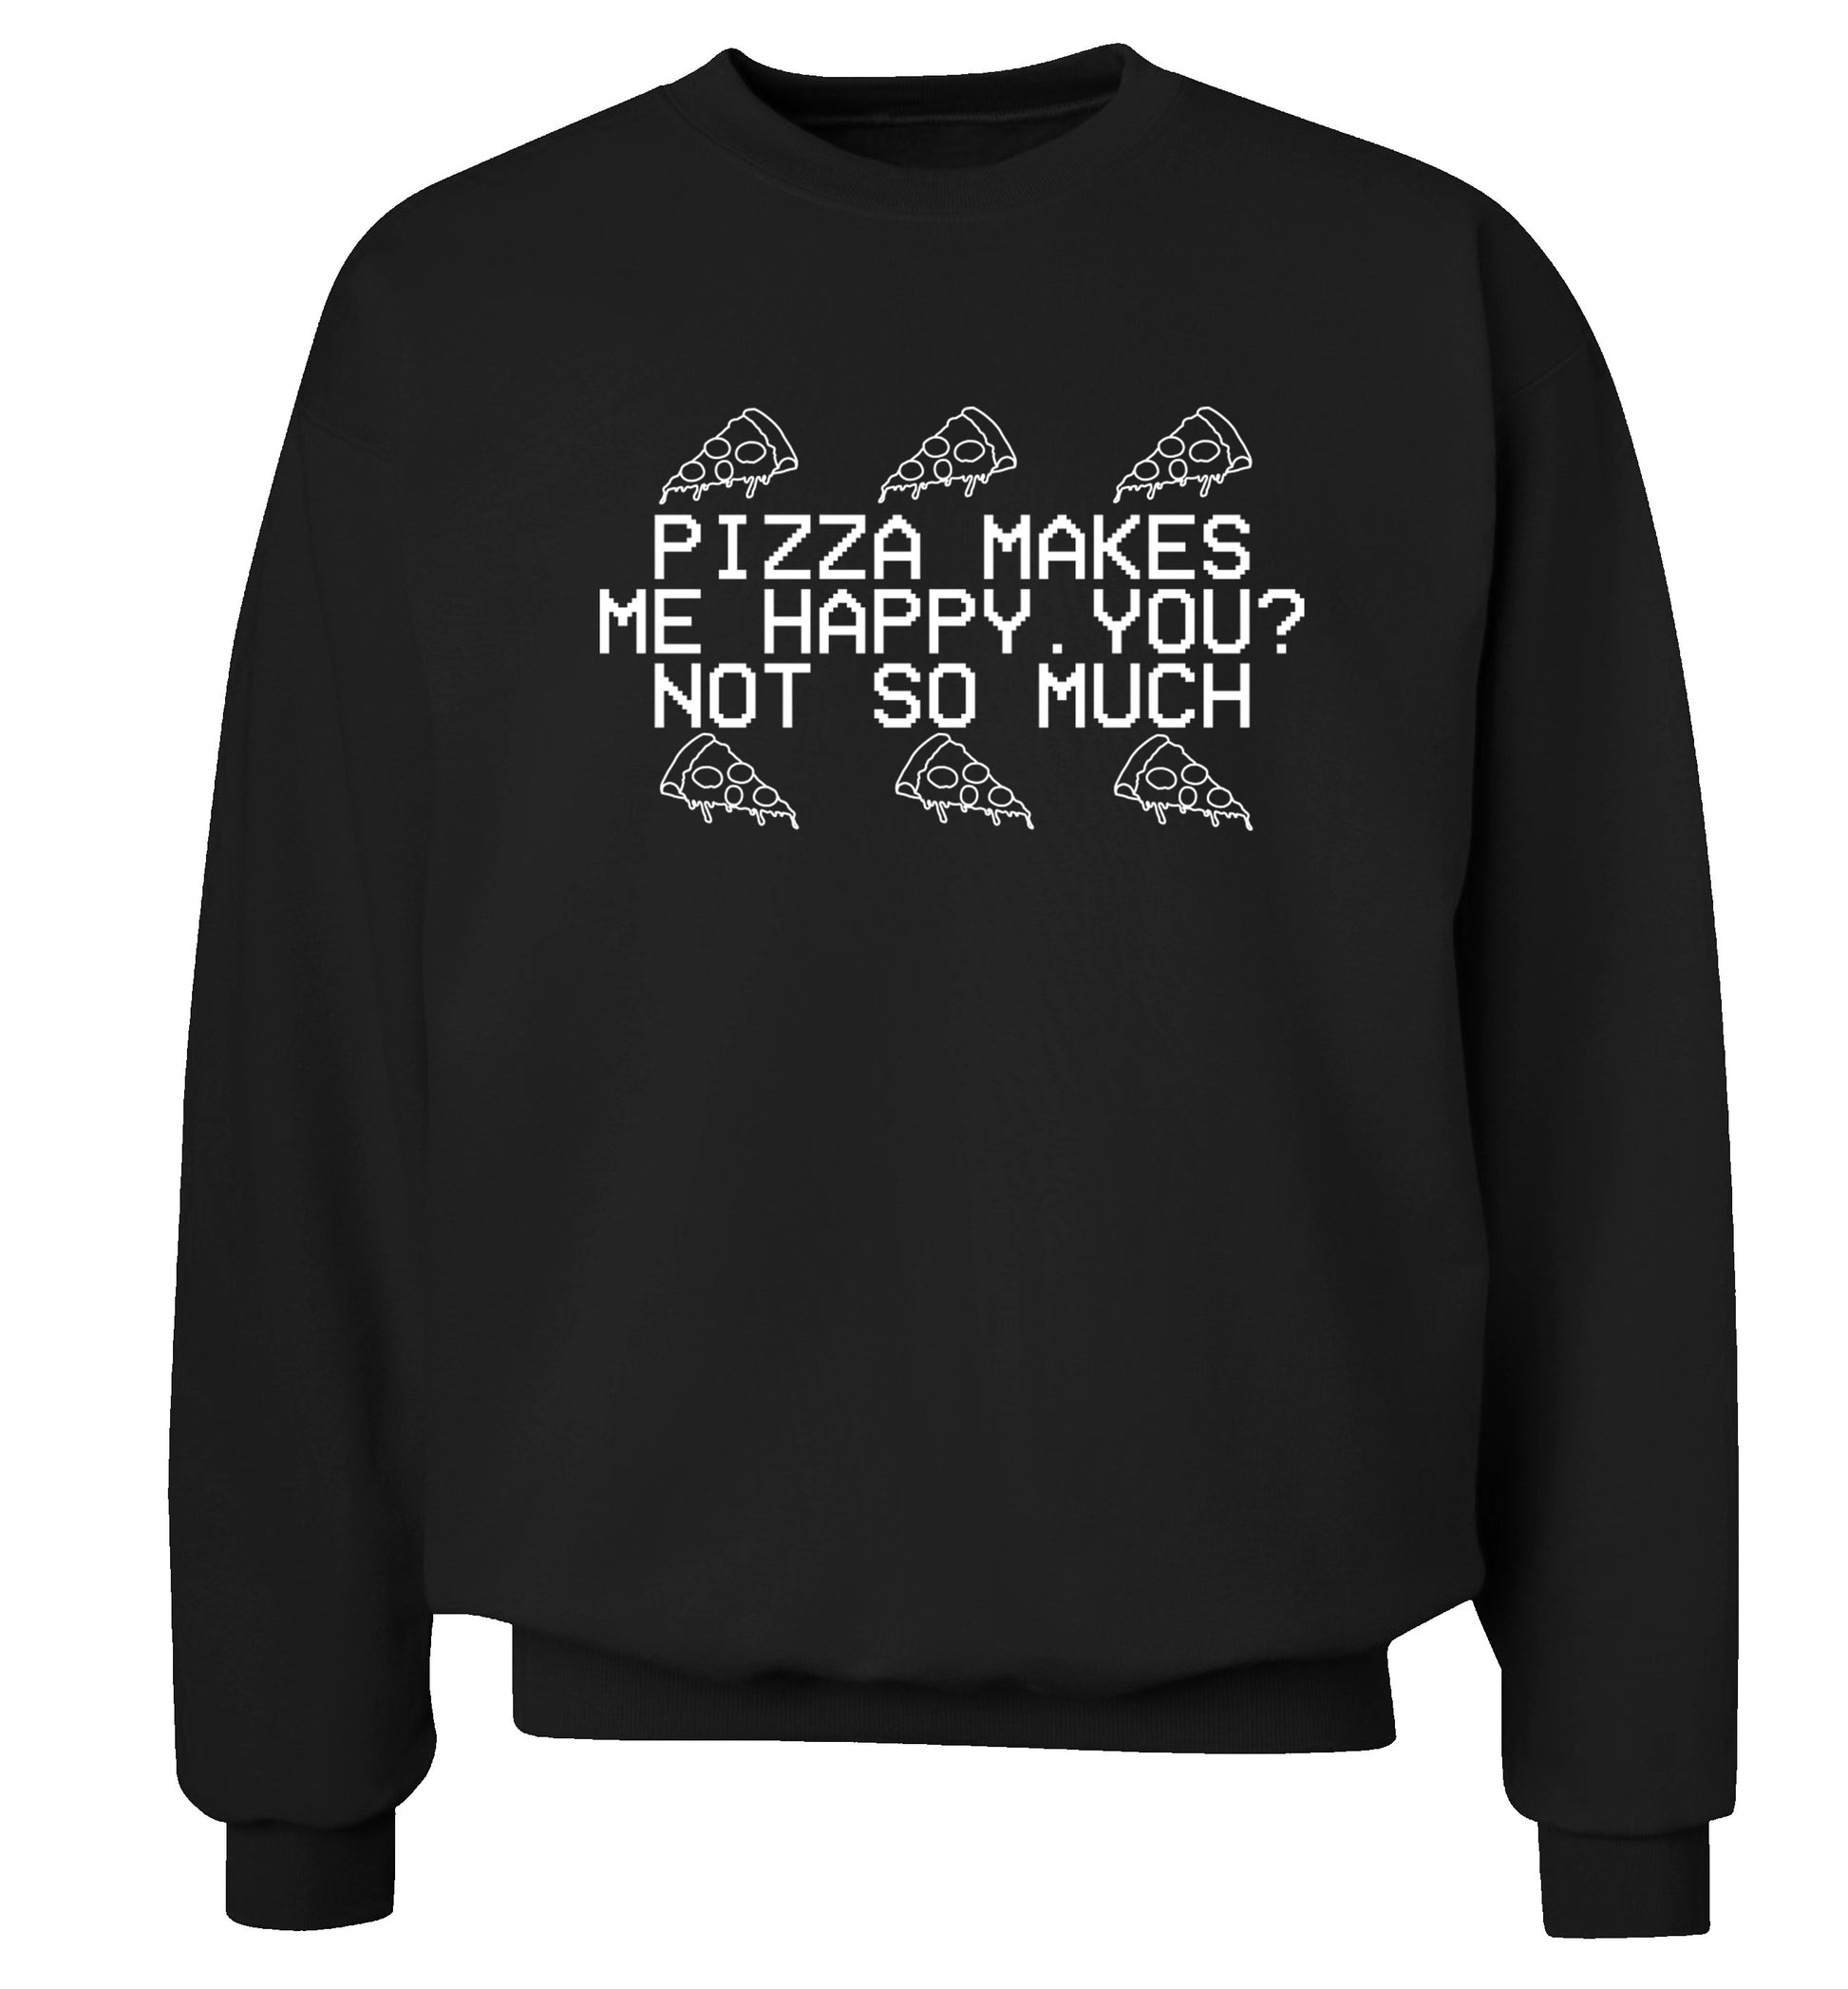 Pizza makes me happy, You? Not so much Adult's unisex black  sweater 2XL